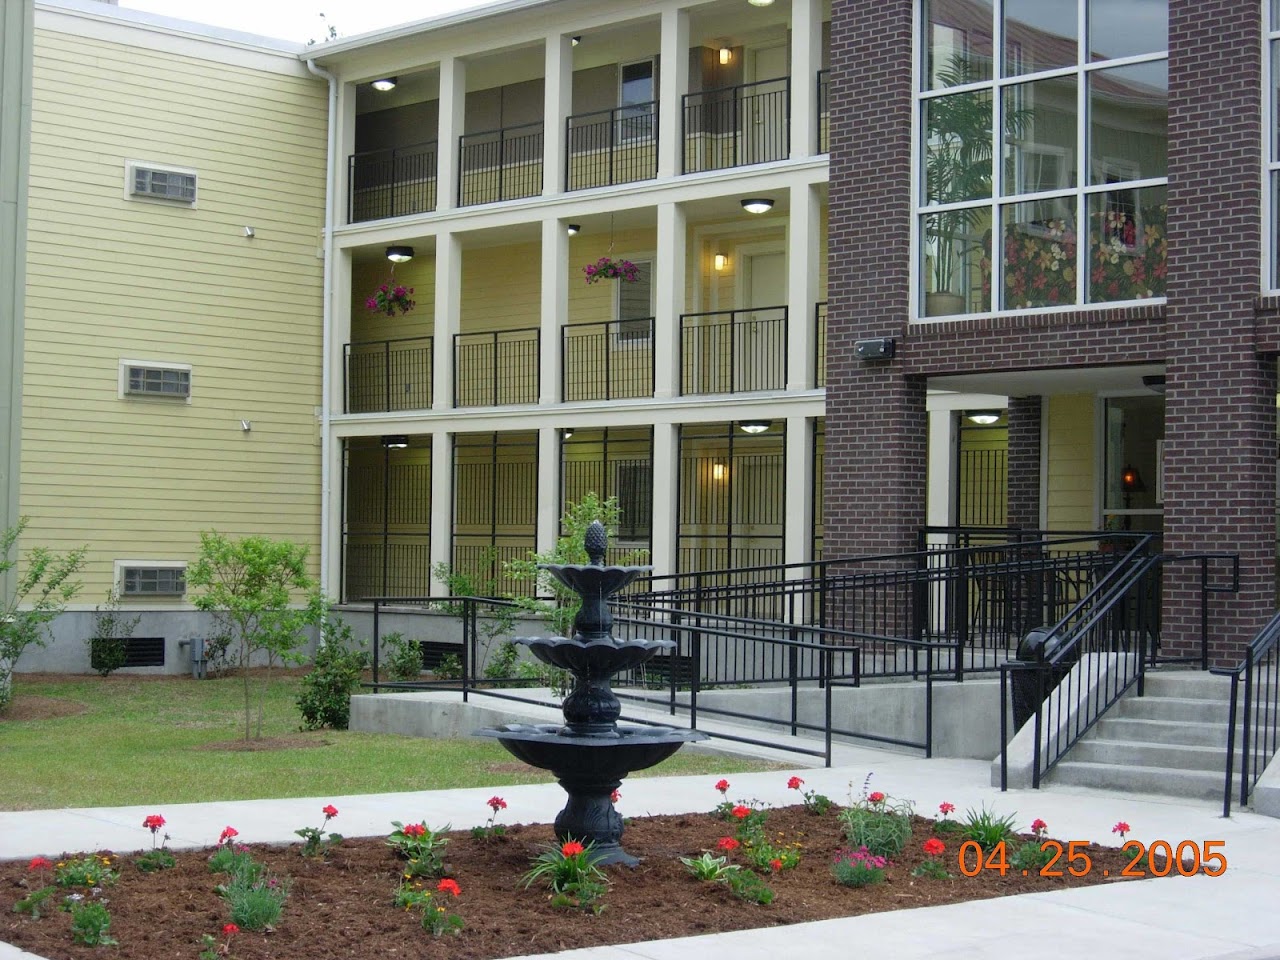 Photo of RADCLIFFE MANOR. Affordable housing located at 200 COMING ST CHARLESTON, SC 29403